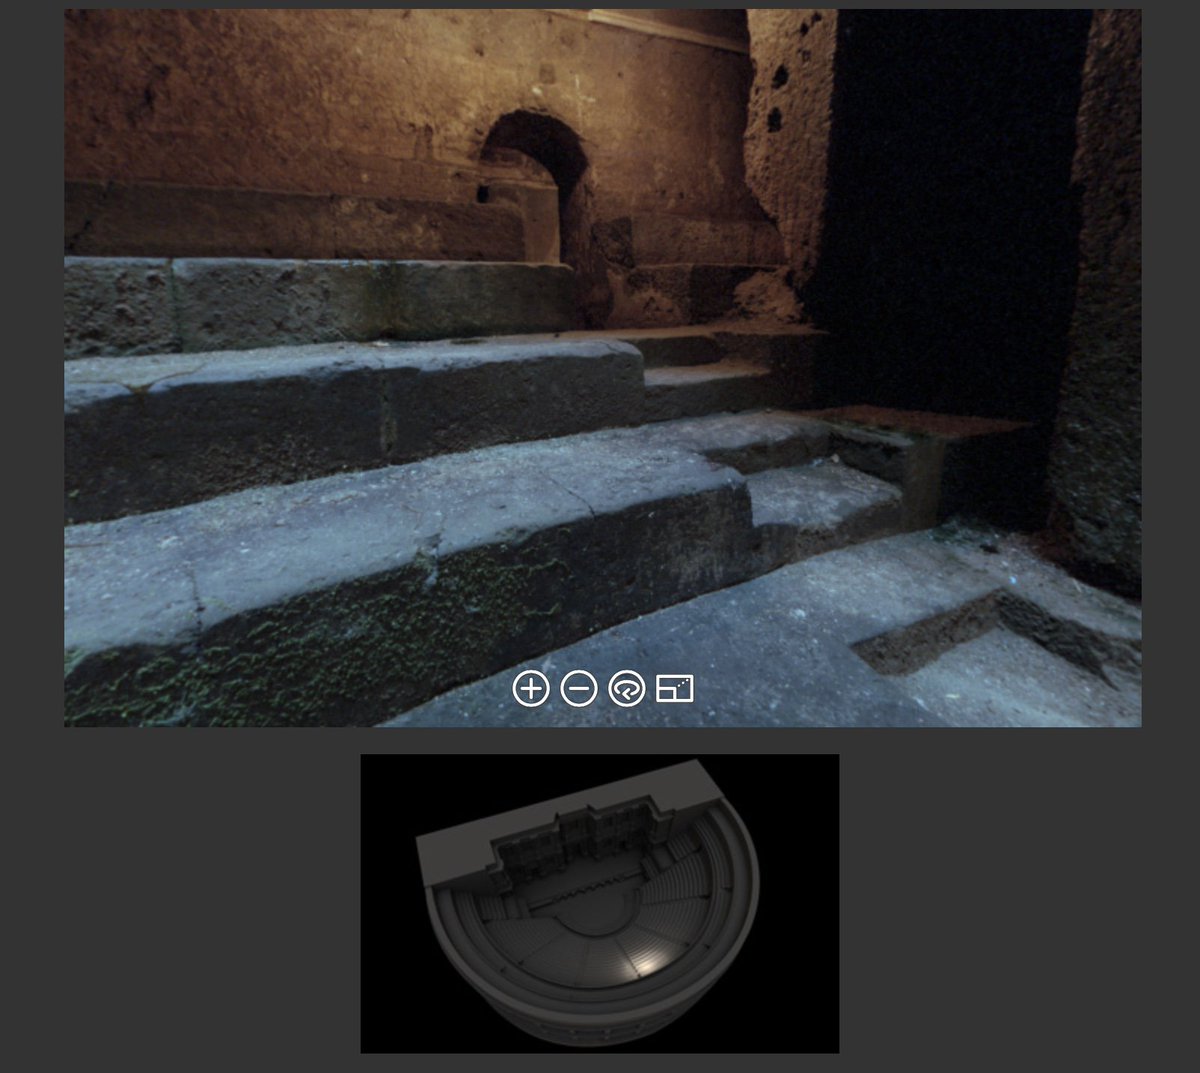 And if there is no chance you can visit the theatre at Herculaneum in person, next best thing is to navigate through the building virtually using the the wonderful panoramic photograph tour compiled by my friend Brian Donovan.  http://www.donovanimages.co.nz/proxima-veritati/Herculaneum/Theatre/index.html